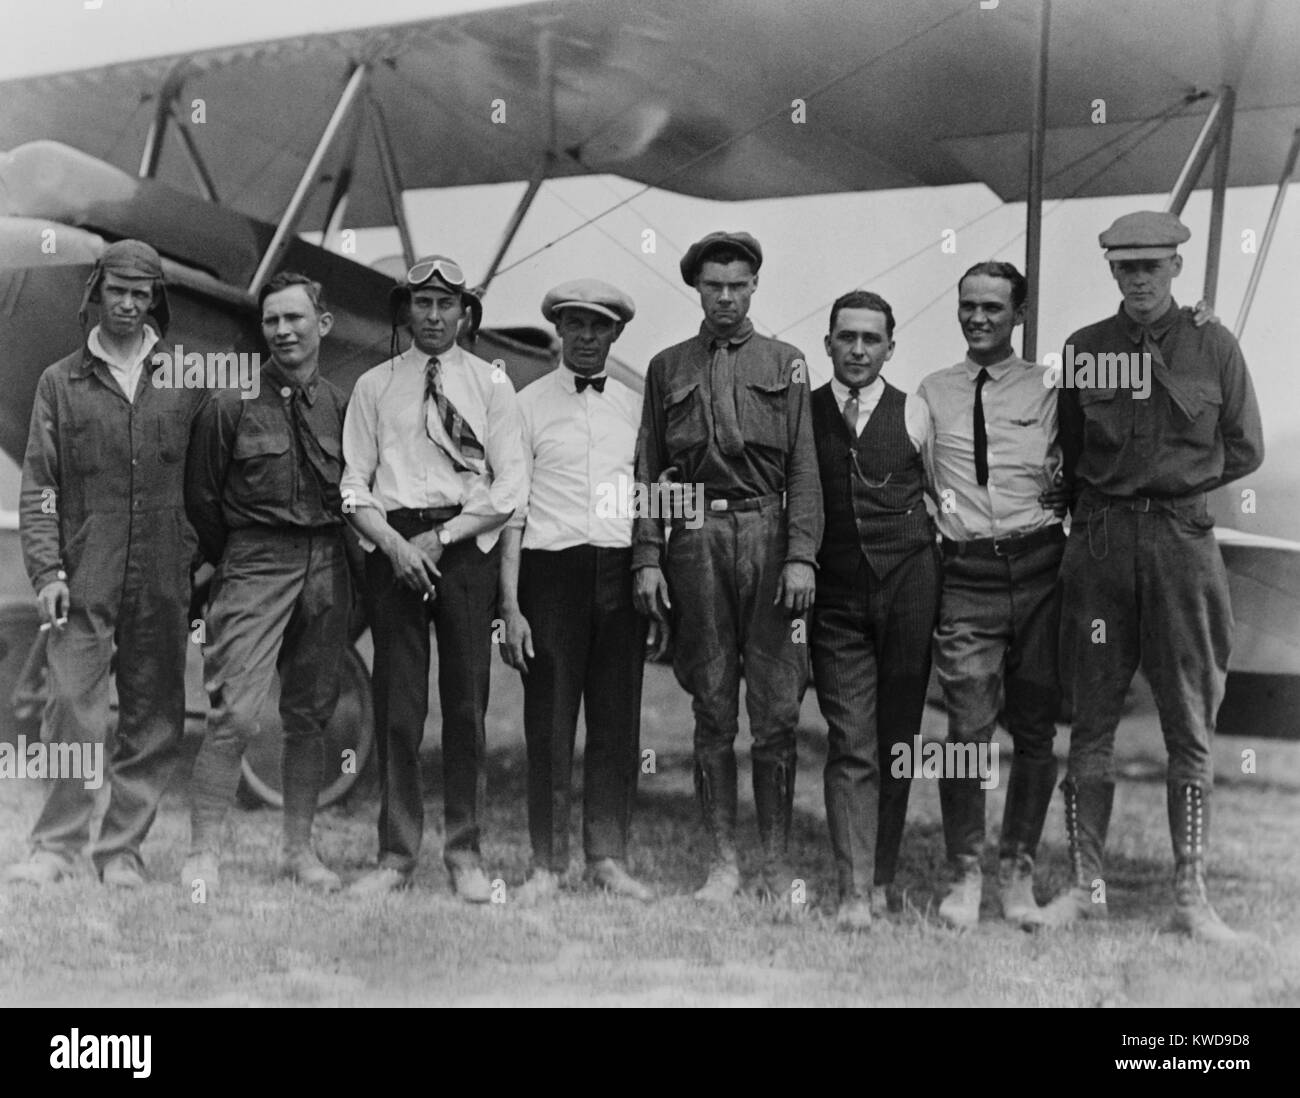 Charles Lindbergh with seven other men, in front of biplane, Lambert-St. Louis Field, 1923. Lindbergh was then a 21 year old flyer attending Air Races, and then decided to remain at Lambert as an instructor (BSLOC 2016 10 147) Stock Photo